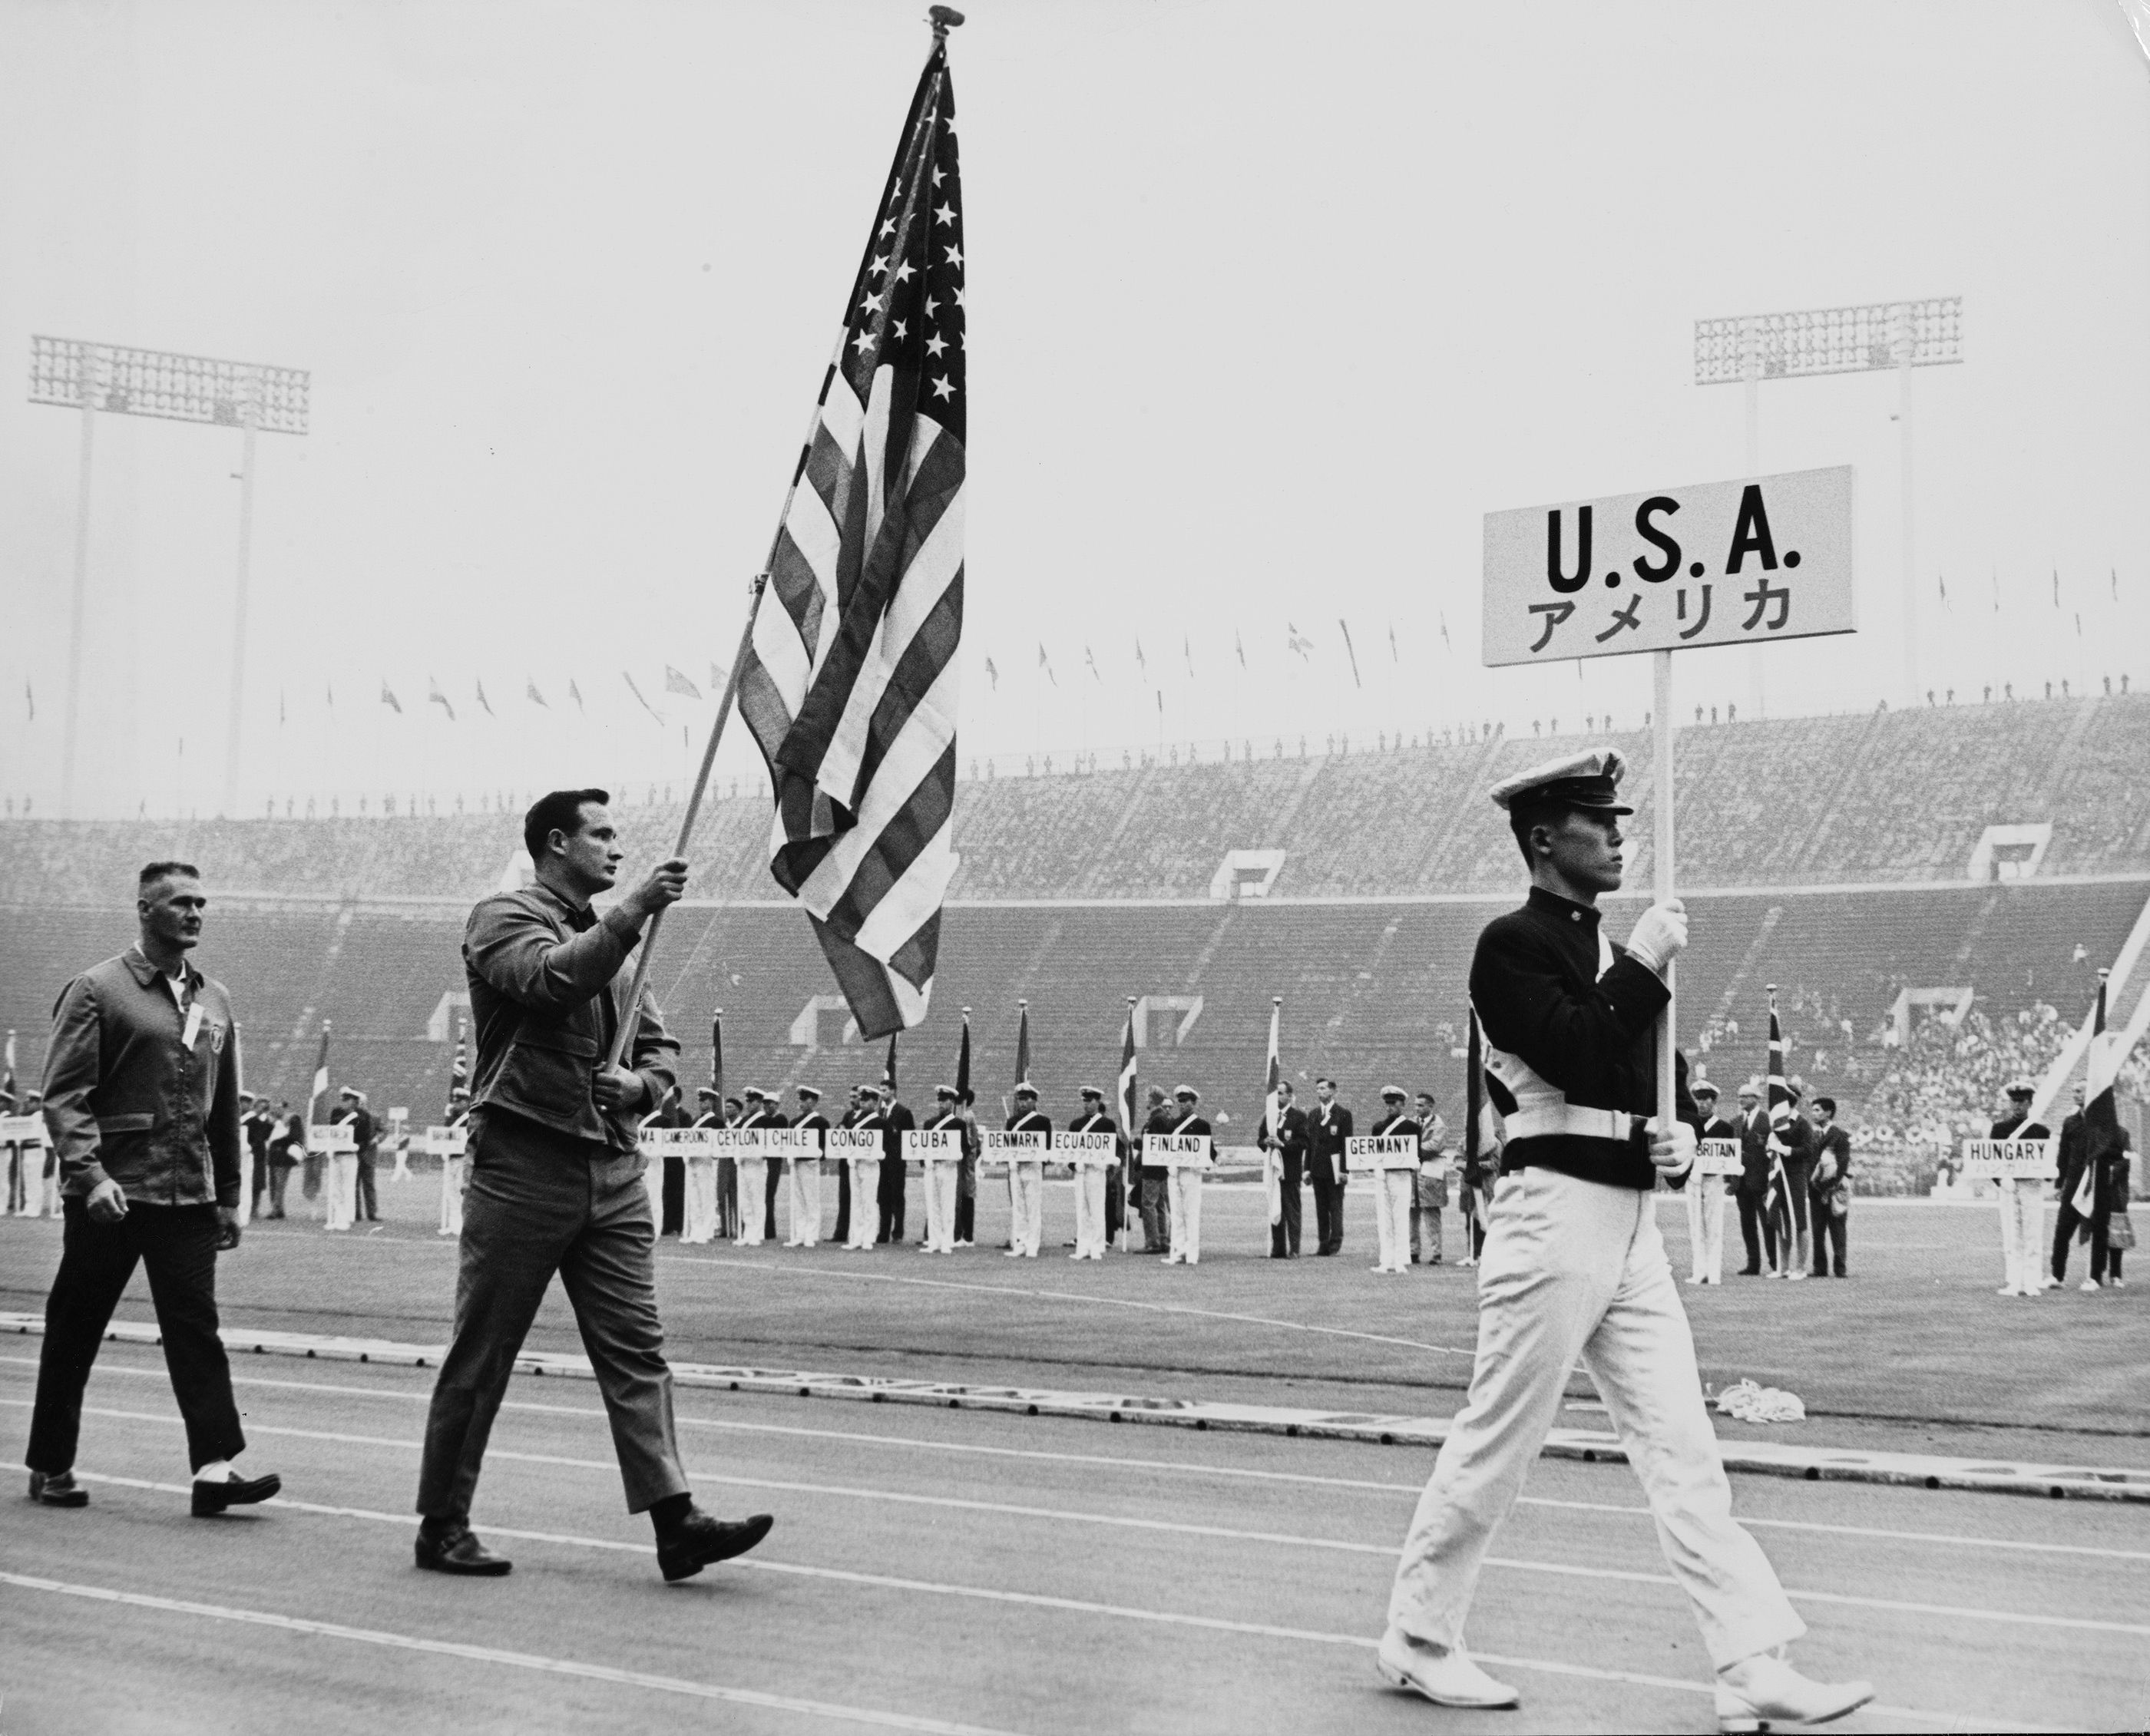 Parry O'Brien during the final rehearsal for the opening ceremony of the 1964 Olympic Games in Tokyo